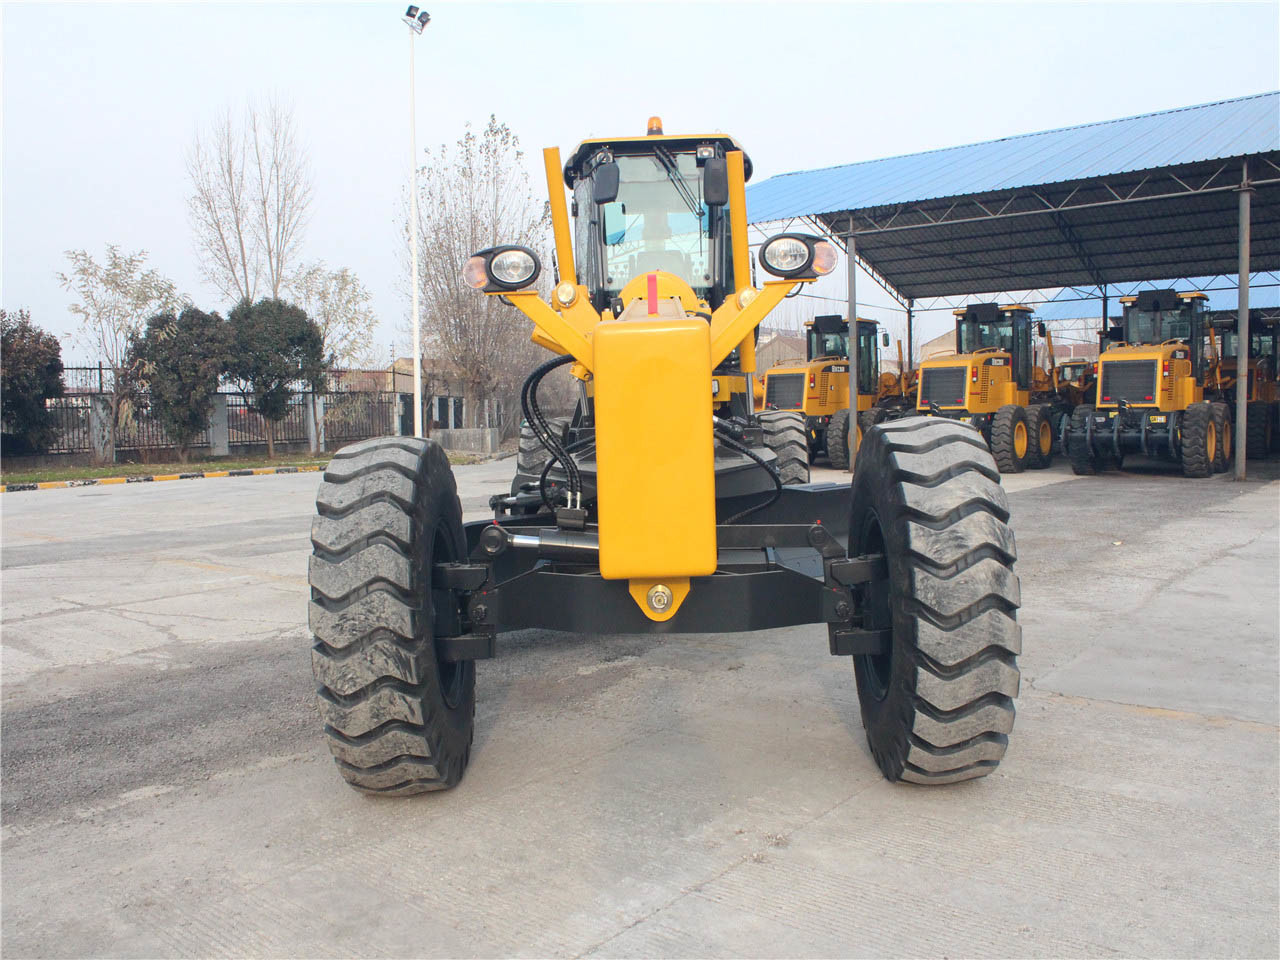 China New 200HP Hydraulic Motor Grader for Sale Gr2003 New Motor Grader Gr2003 Small Motor Grader